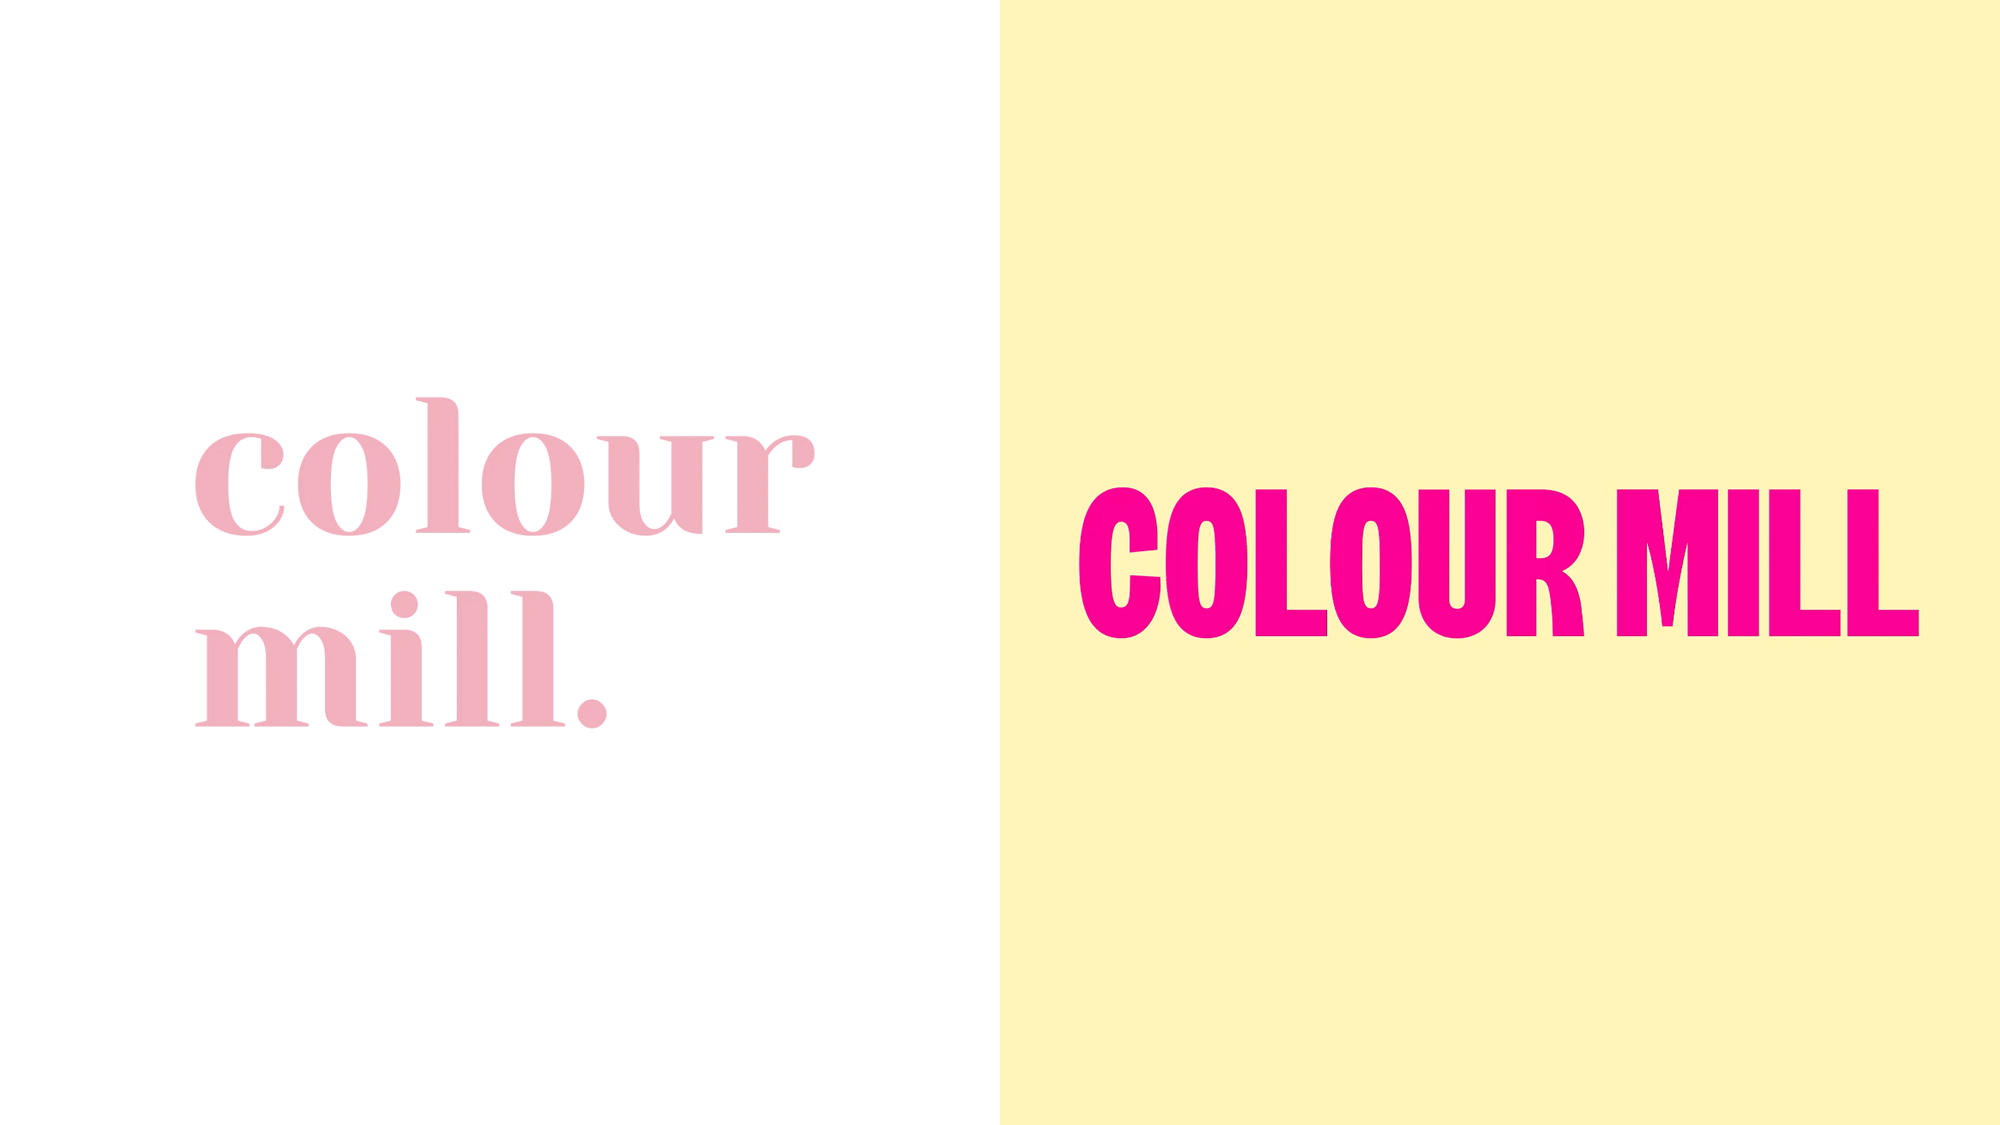 Brand New: New Logo and Identity for Colour Mill by Universal Favourite